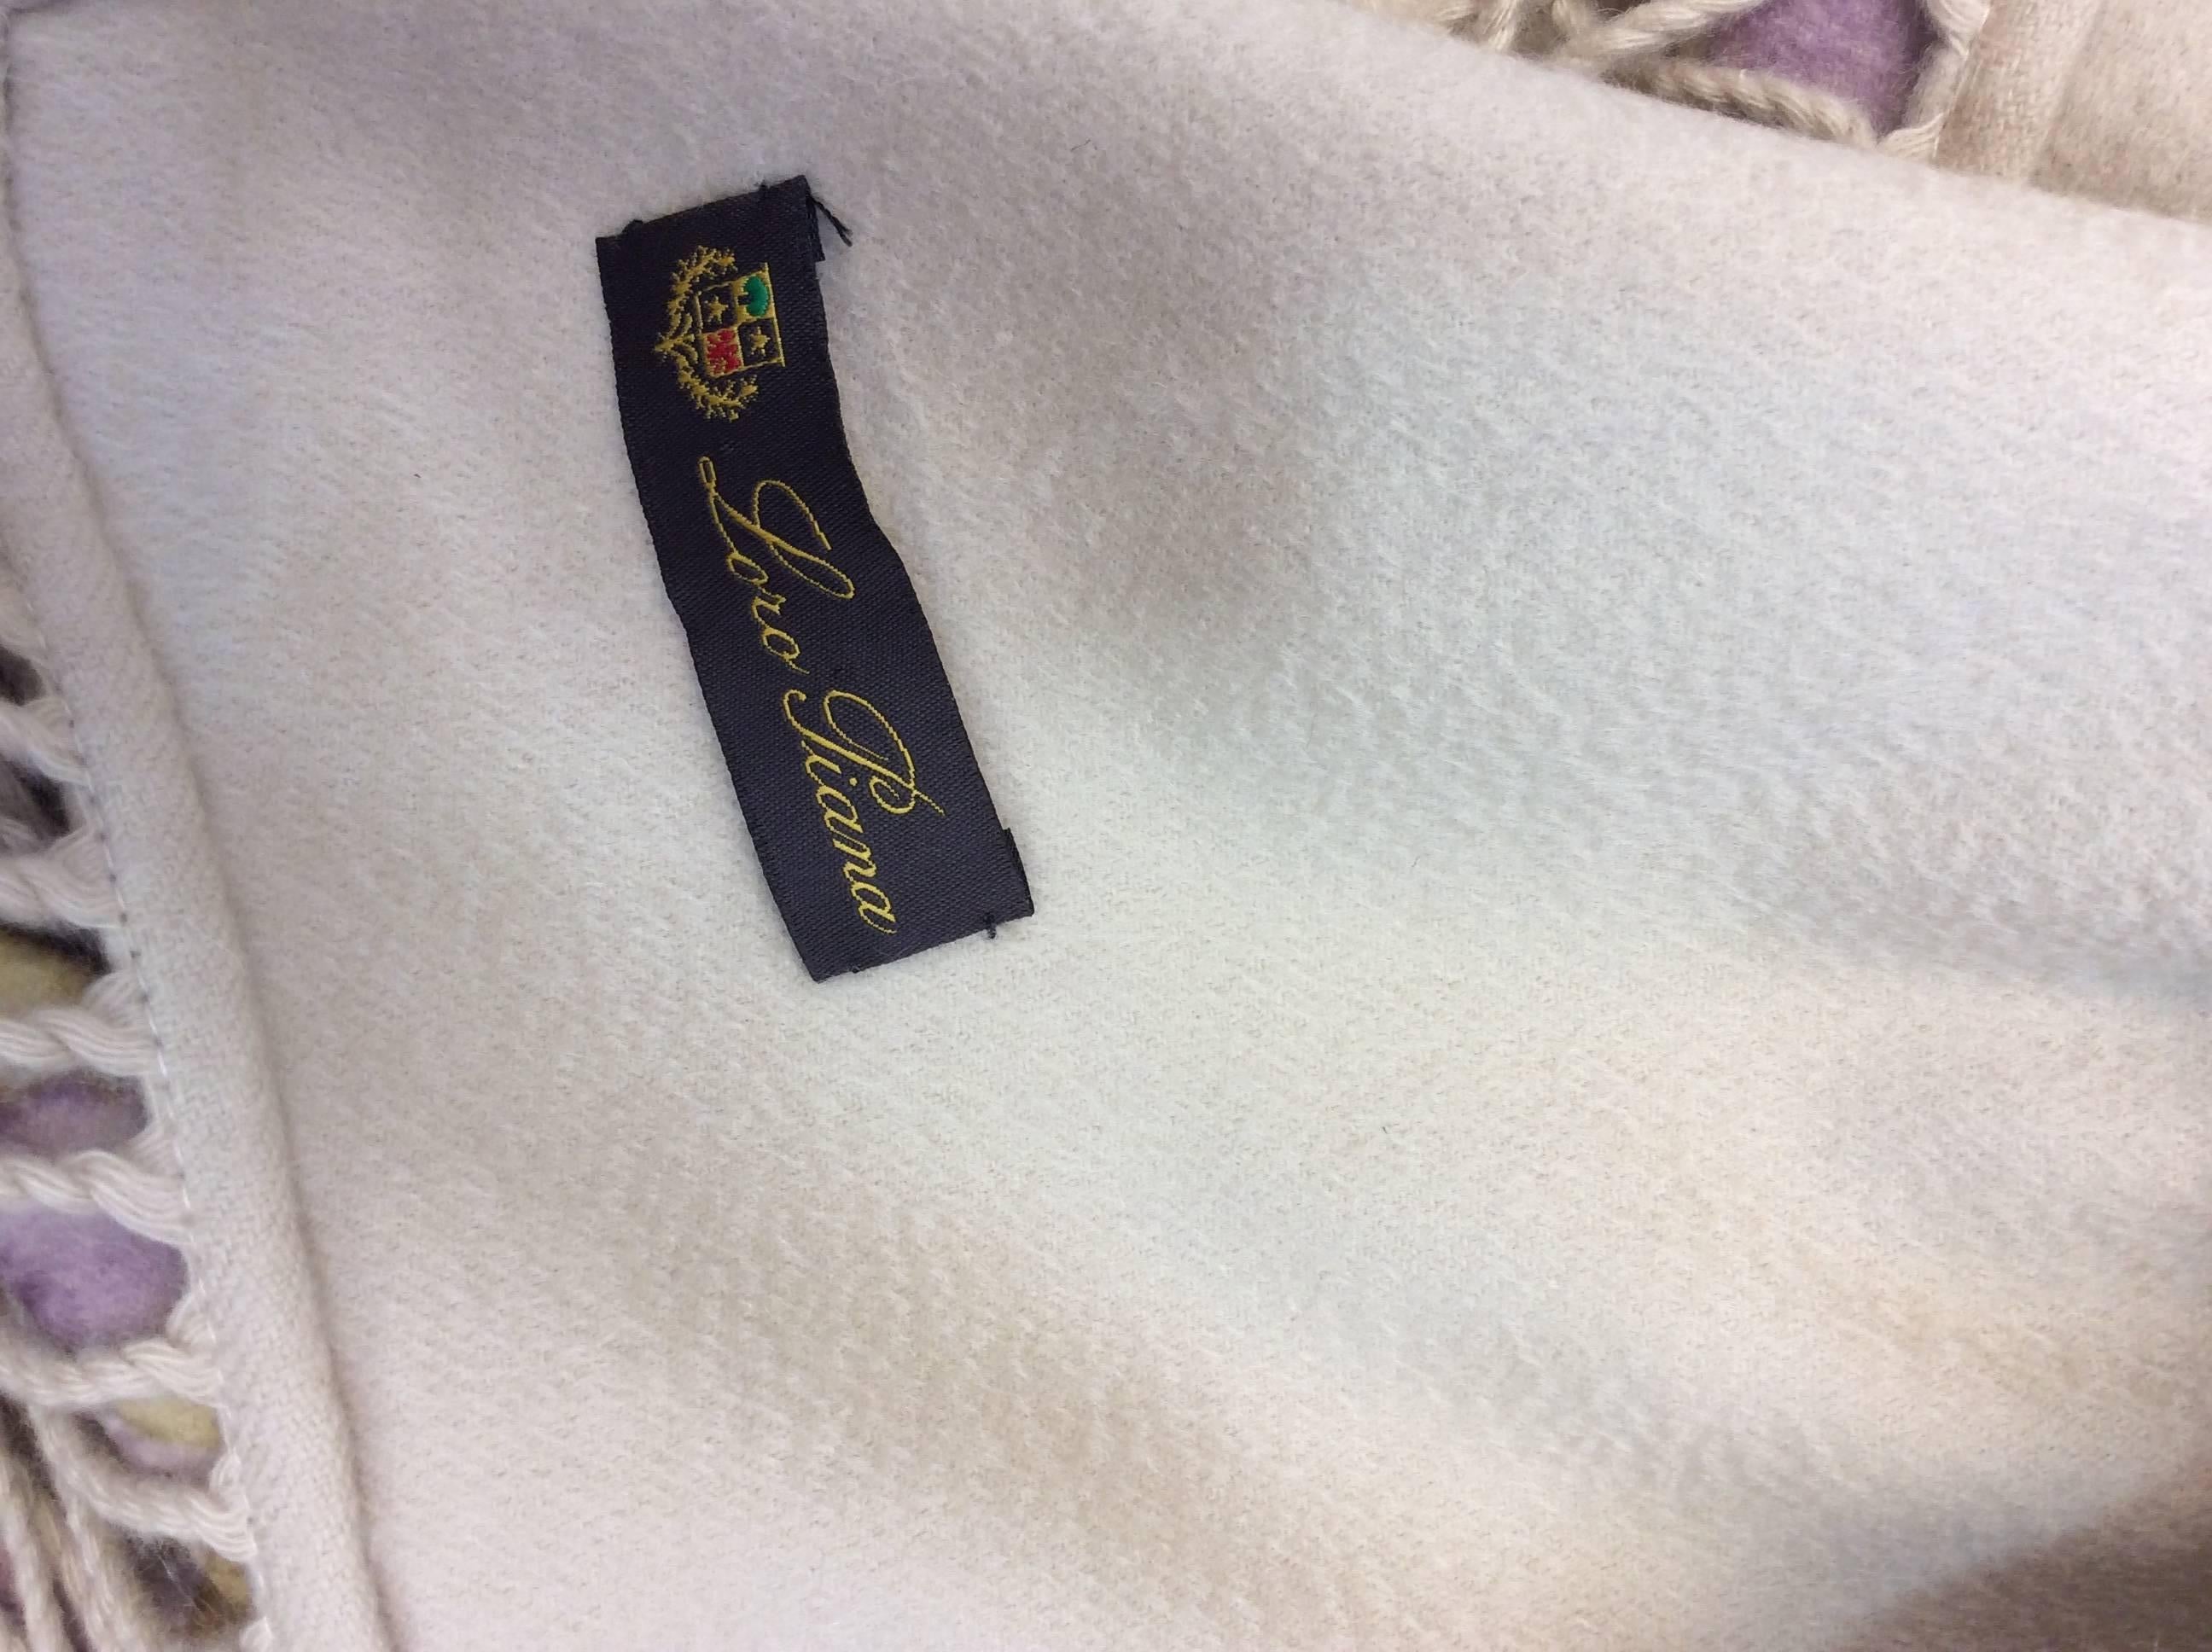 Loro Piana Cream Floral Printed Cashmere Shawl In Excellent Condition For Sale In Narberth, PA